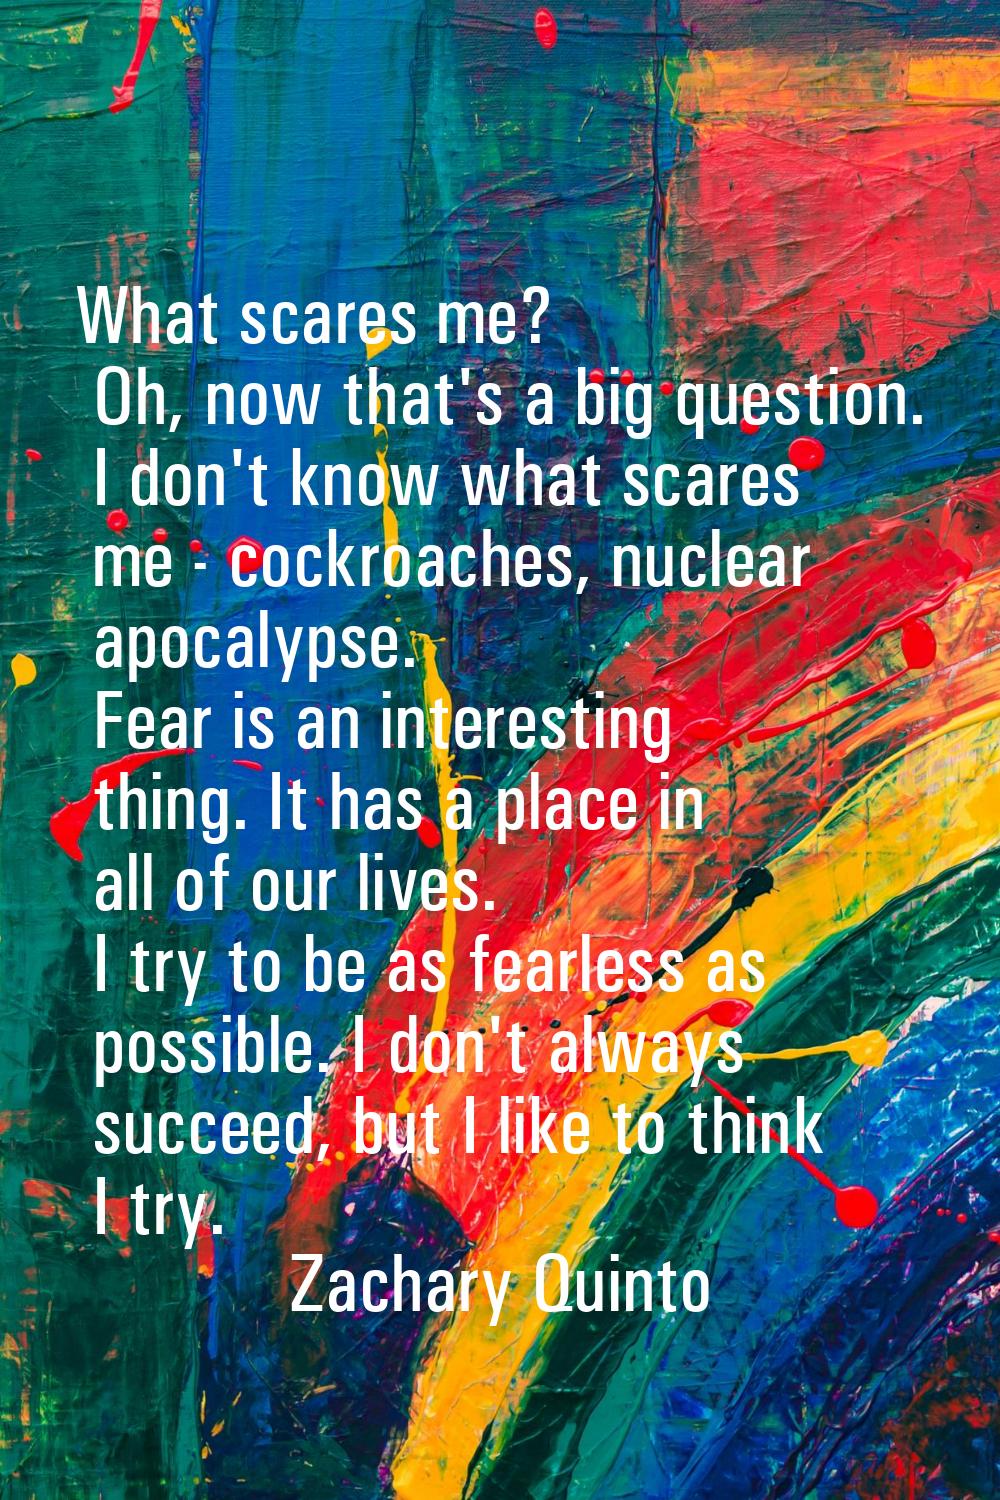 What scares me? Oh, now that's a big question. I don't know what scares me - cockroaches, nuclear a